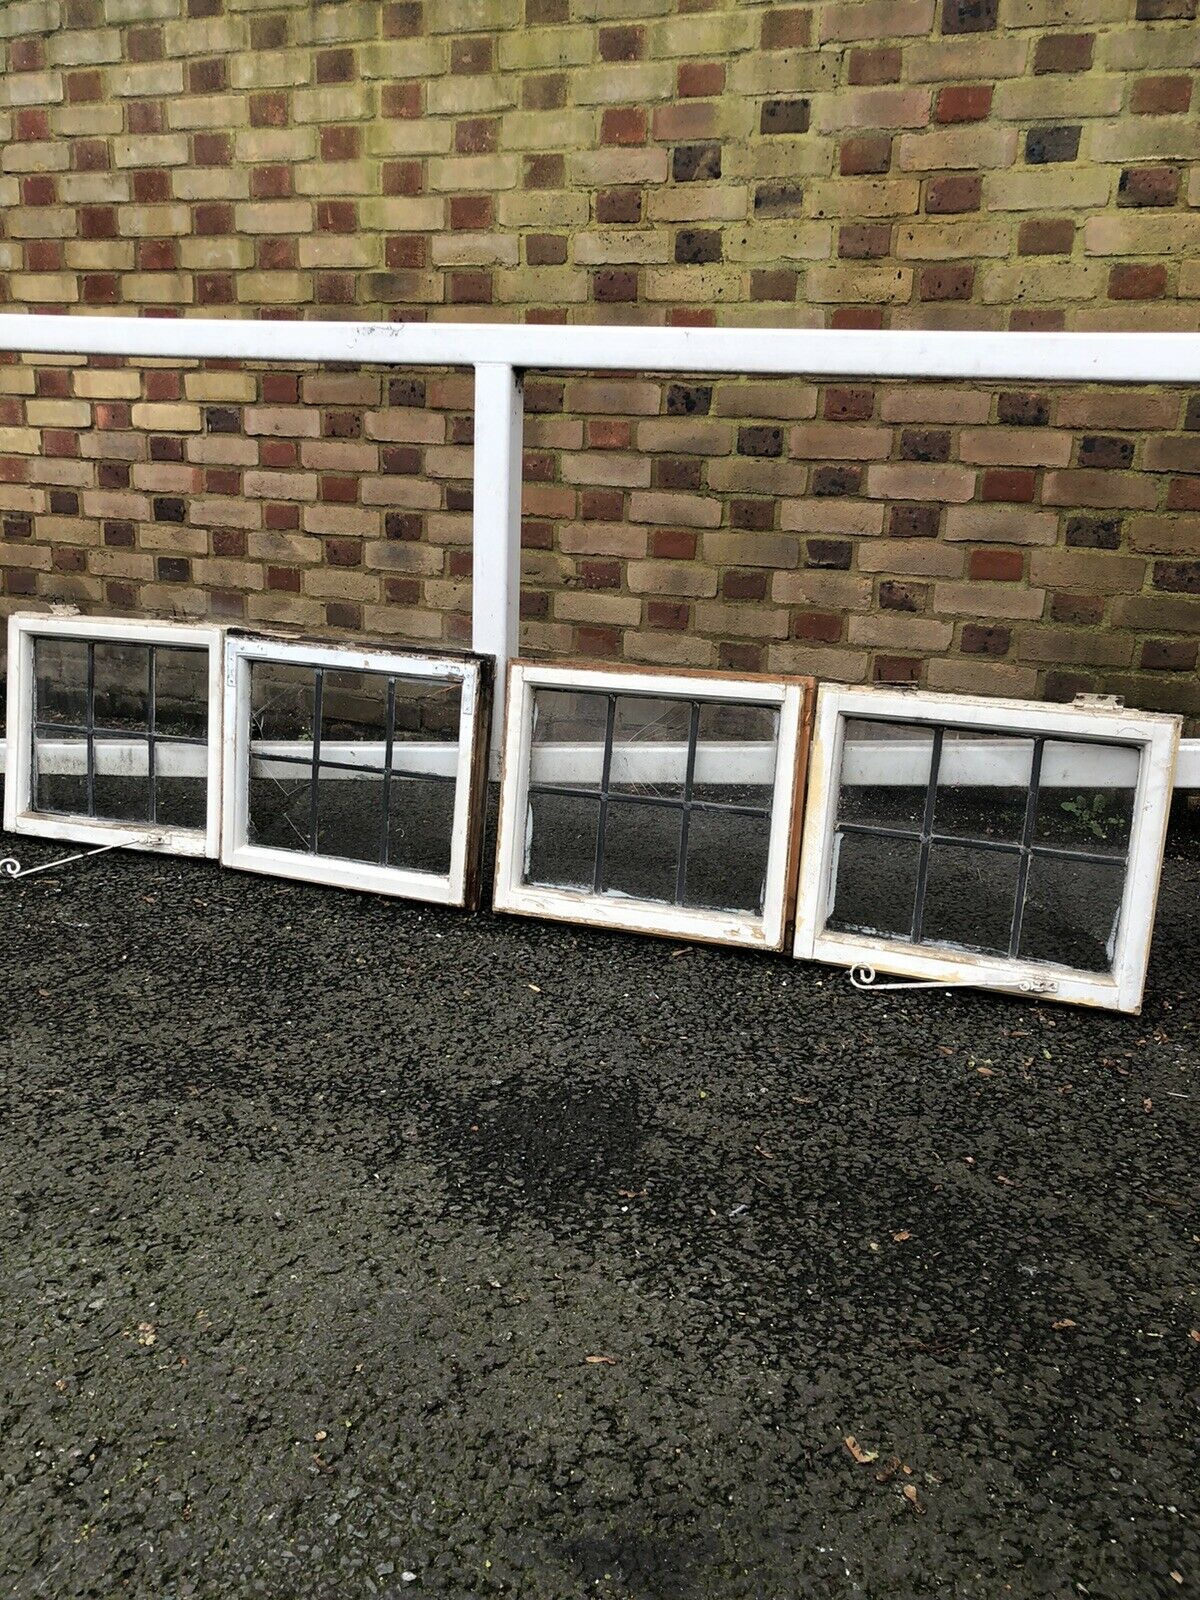 Job Lot Of Four Small Reclaimed Leaded Light Panel Wooden Windows